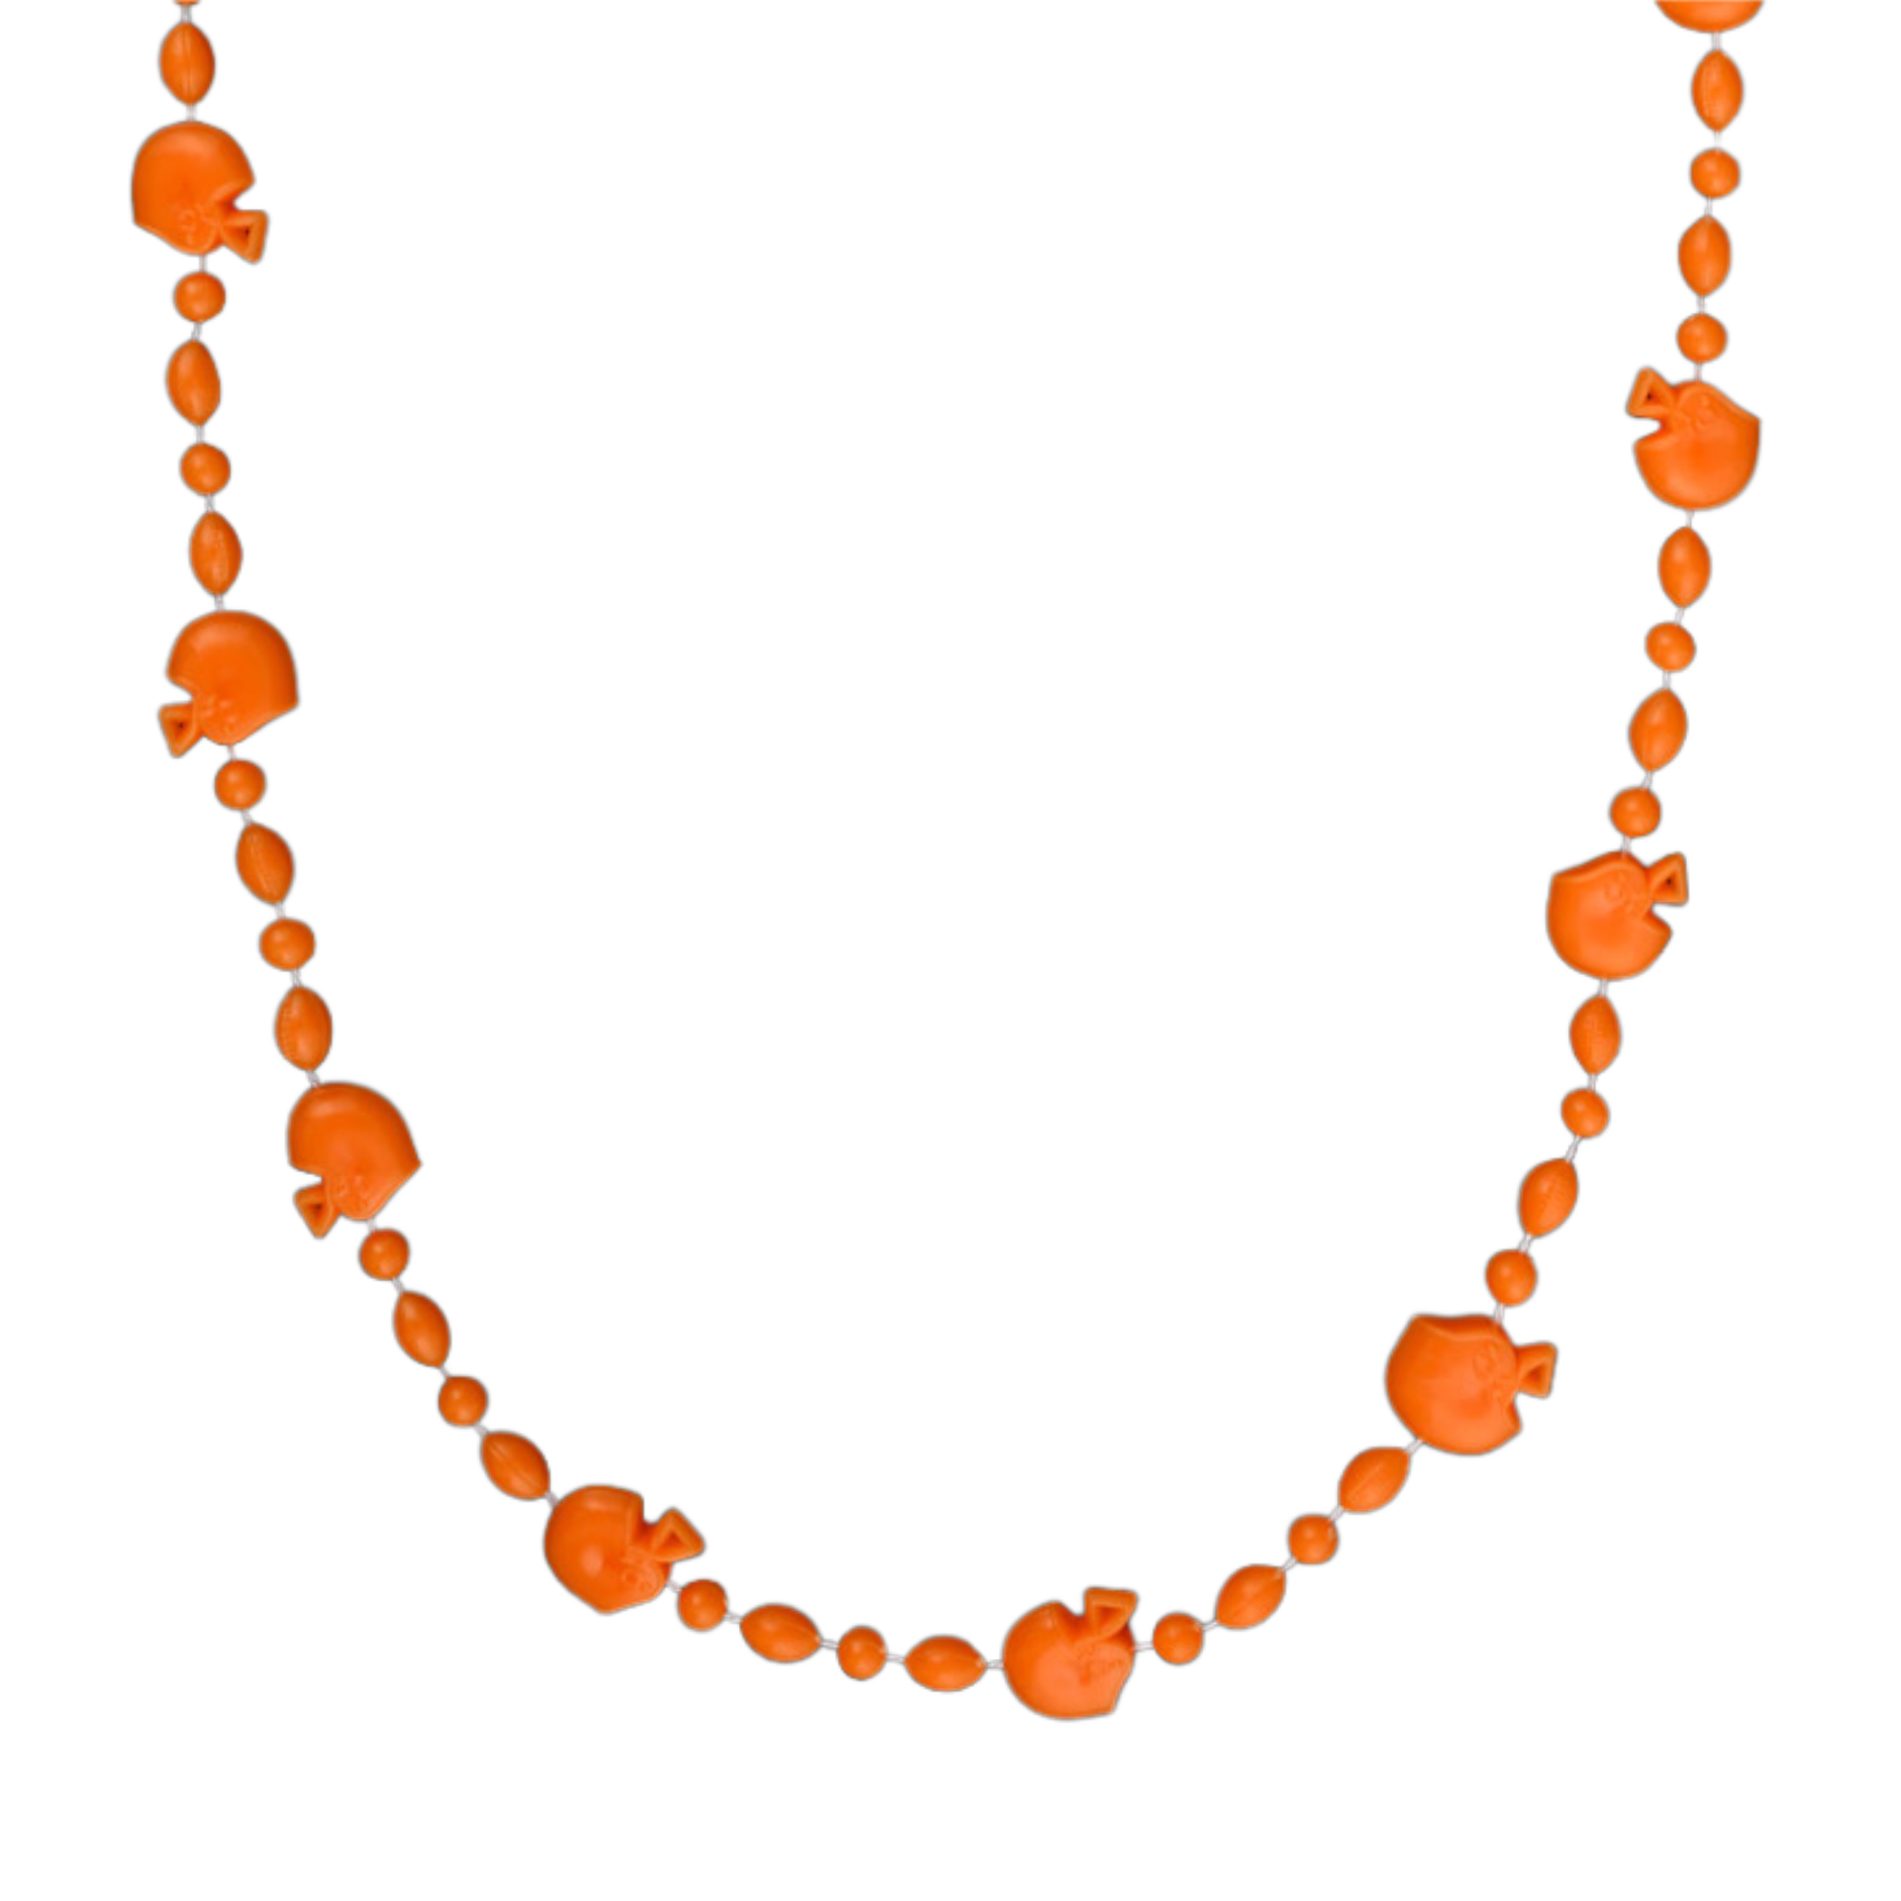 Football Helmet Bead Necklaces Non Metallic Orange Pack of 12 All Products 4